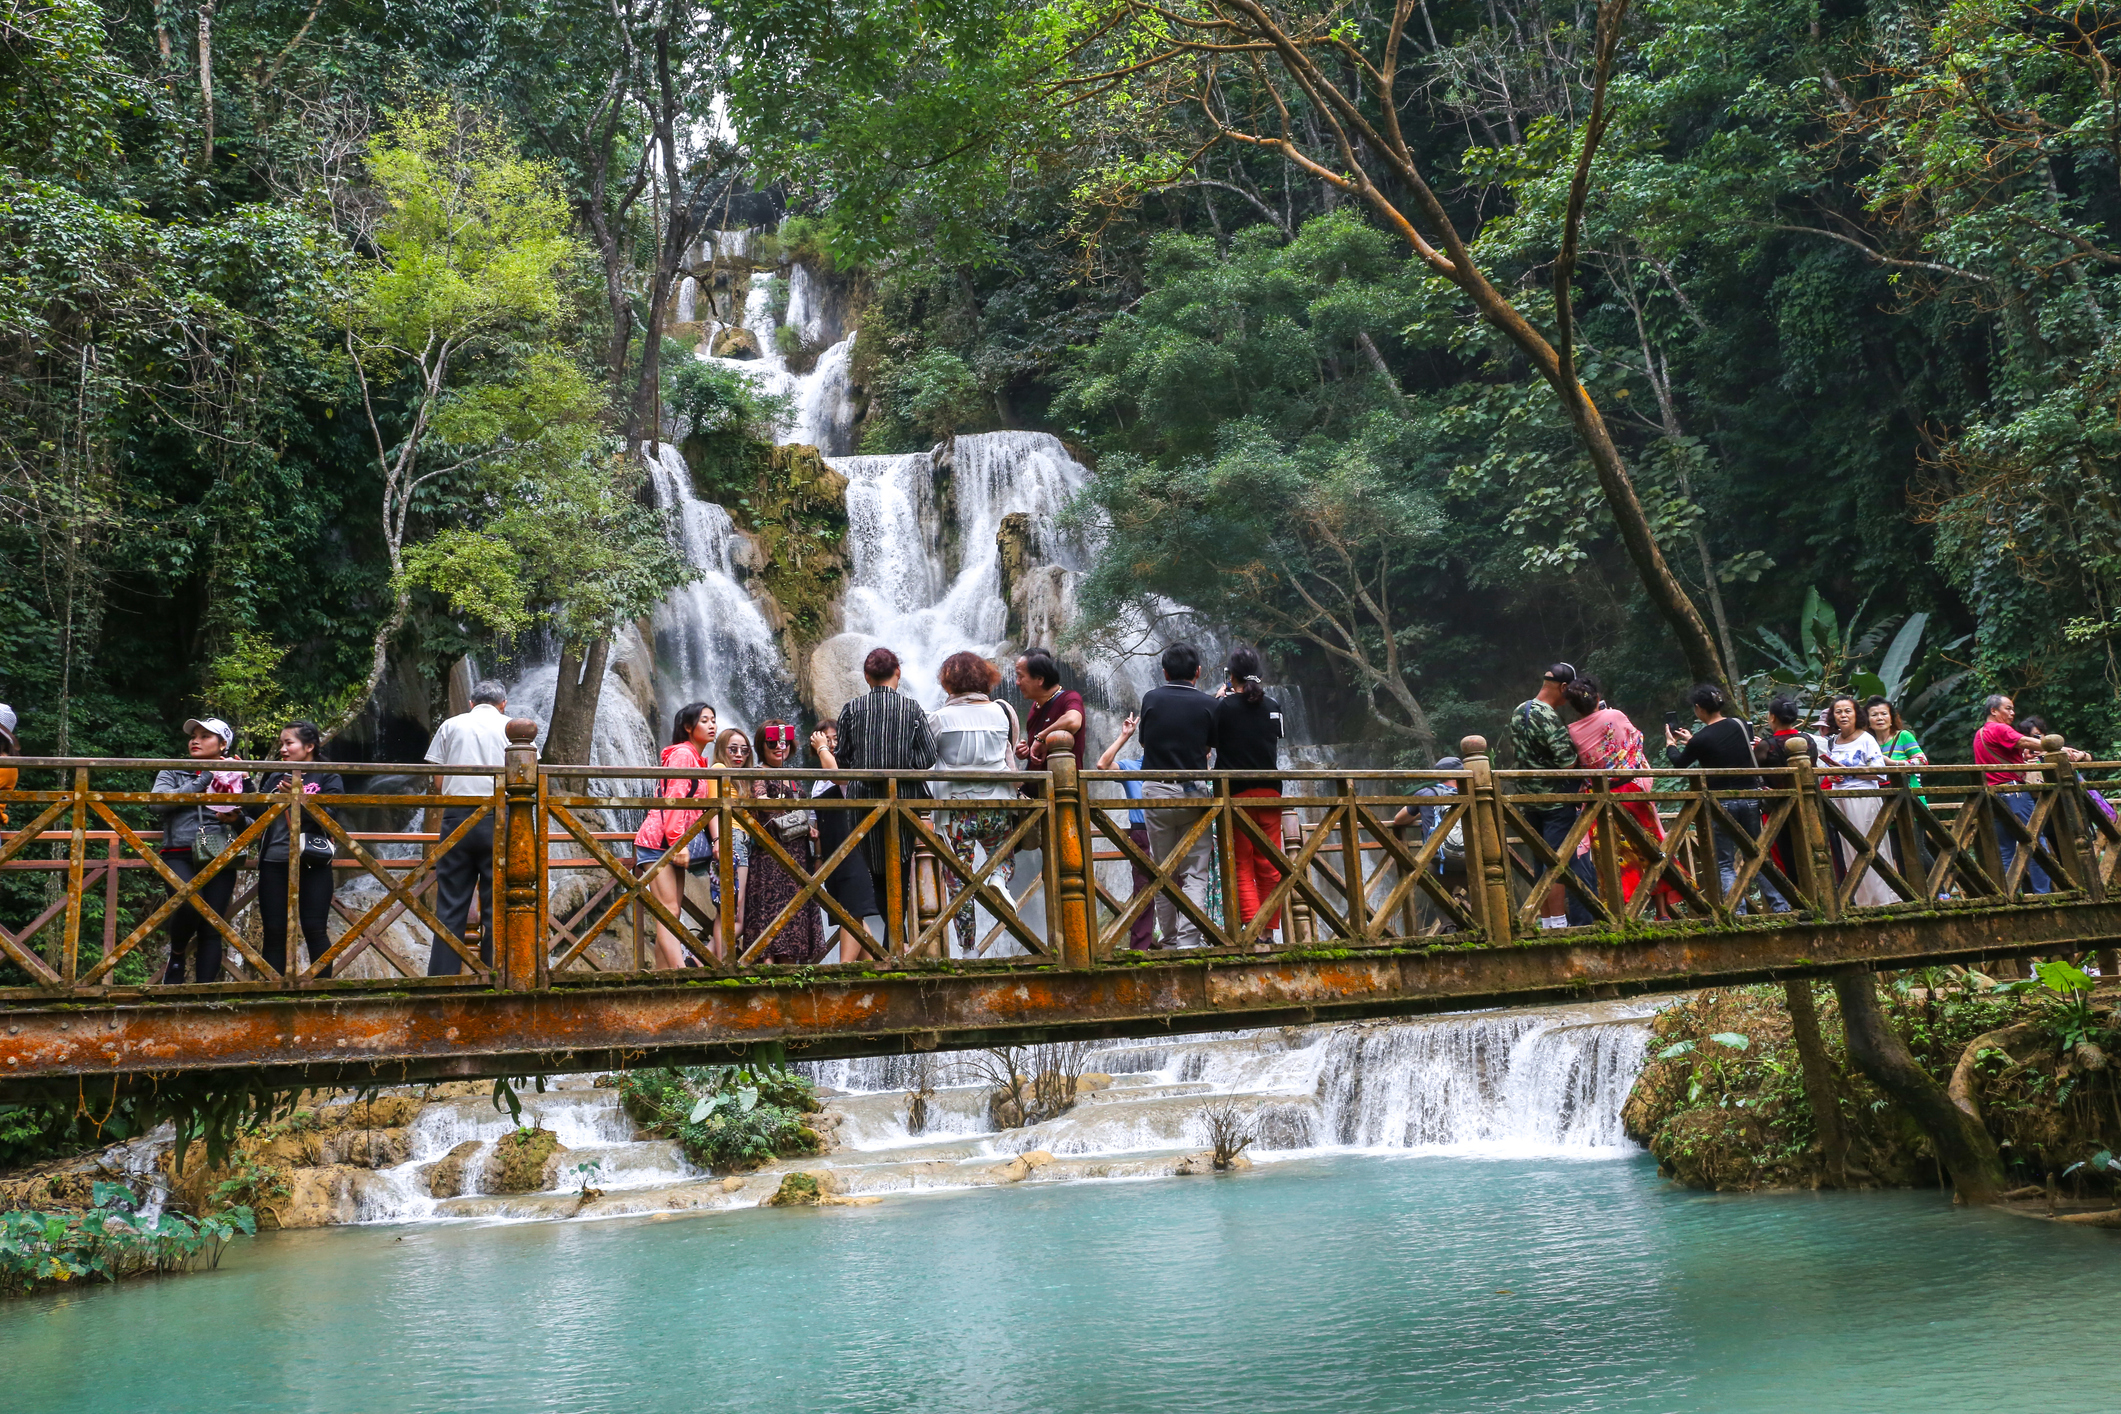 Overseas Visitors to Laos Could Exceed One Million in 2022